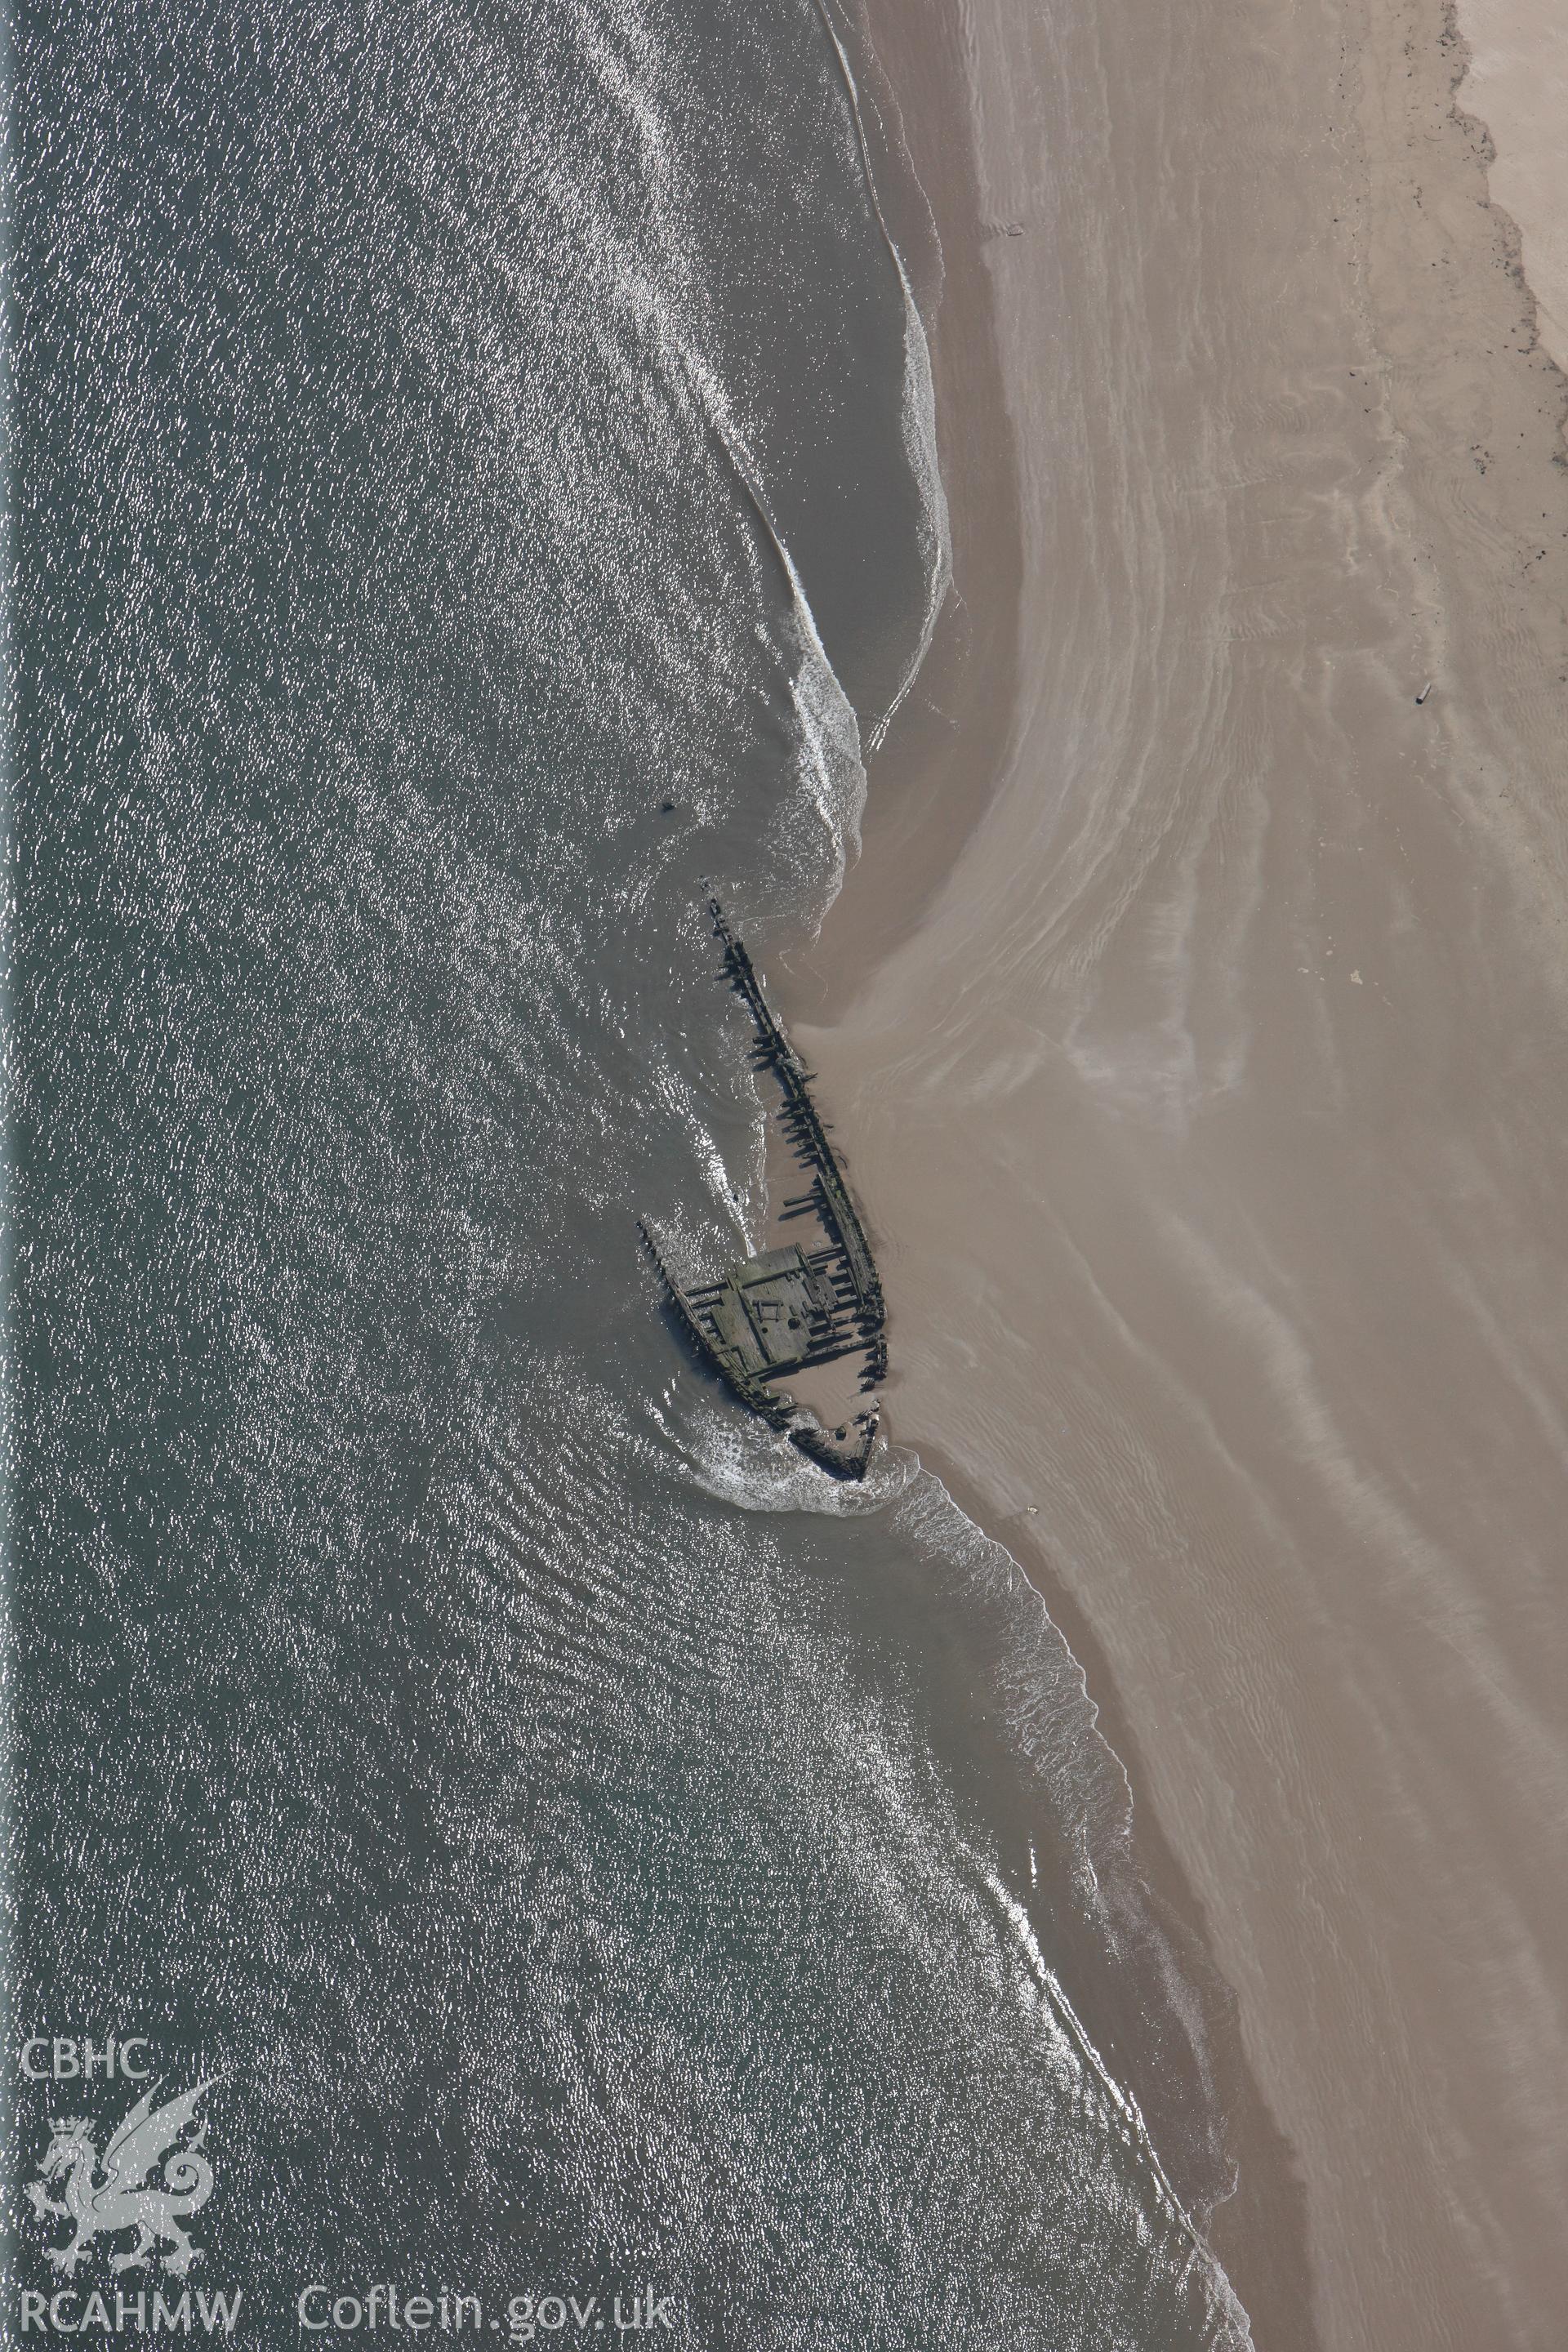 RCAHMW colour oblique photograph of Close view of the wreck Paul, looking east. Taken by Toby Driver on 24/05/2012.